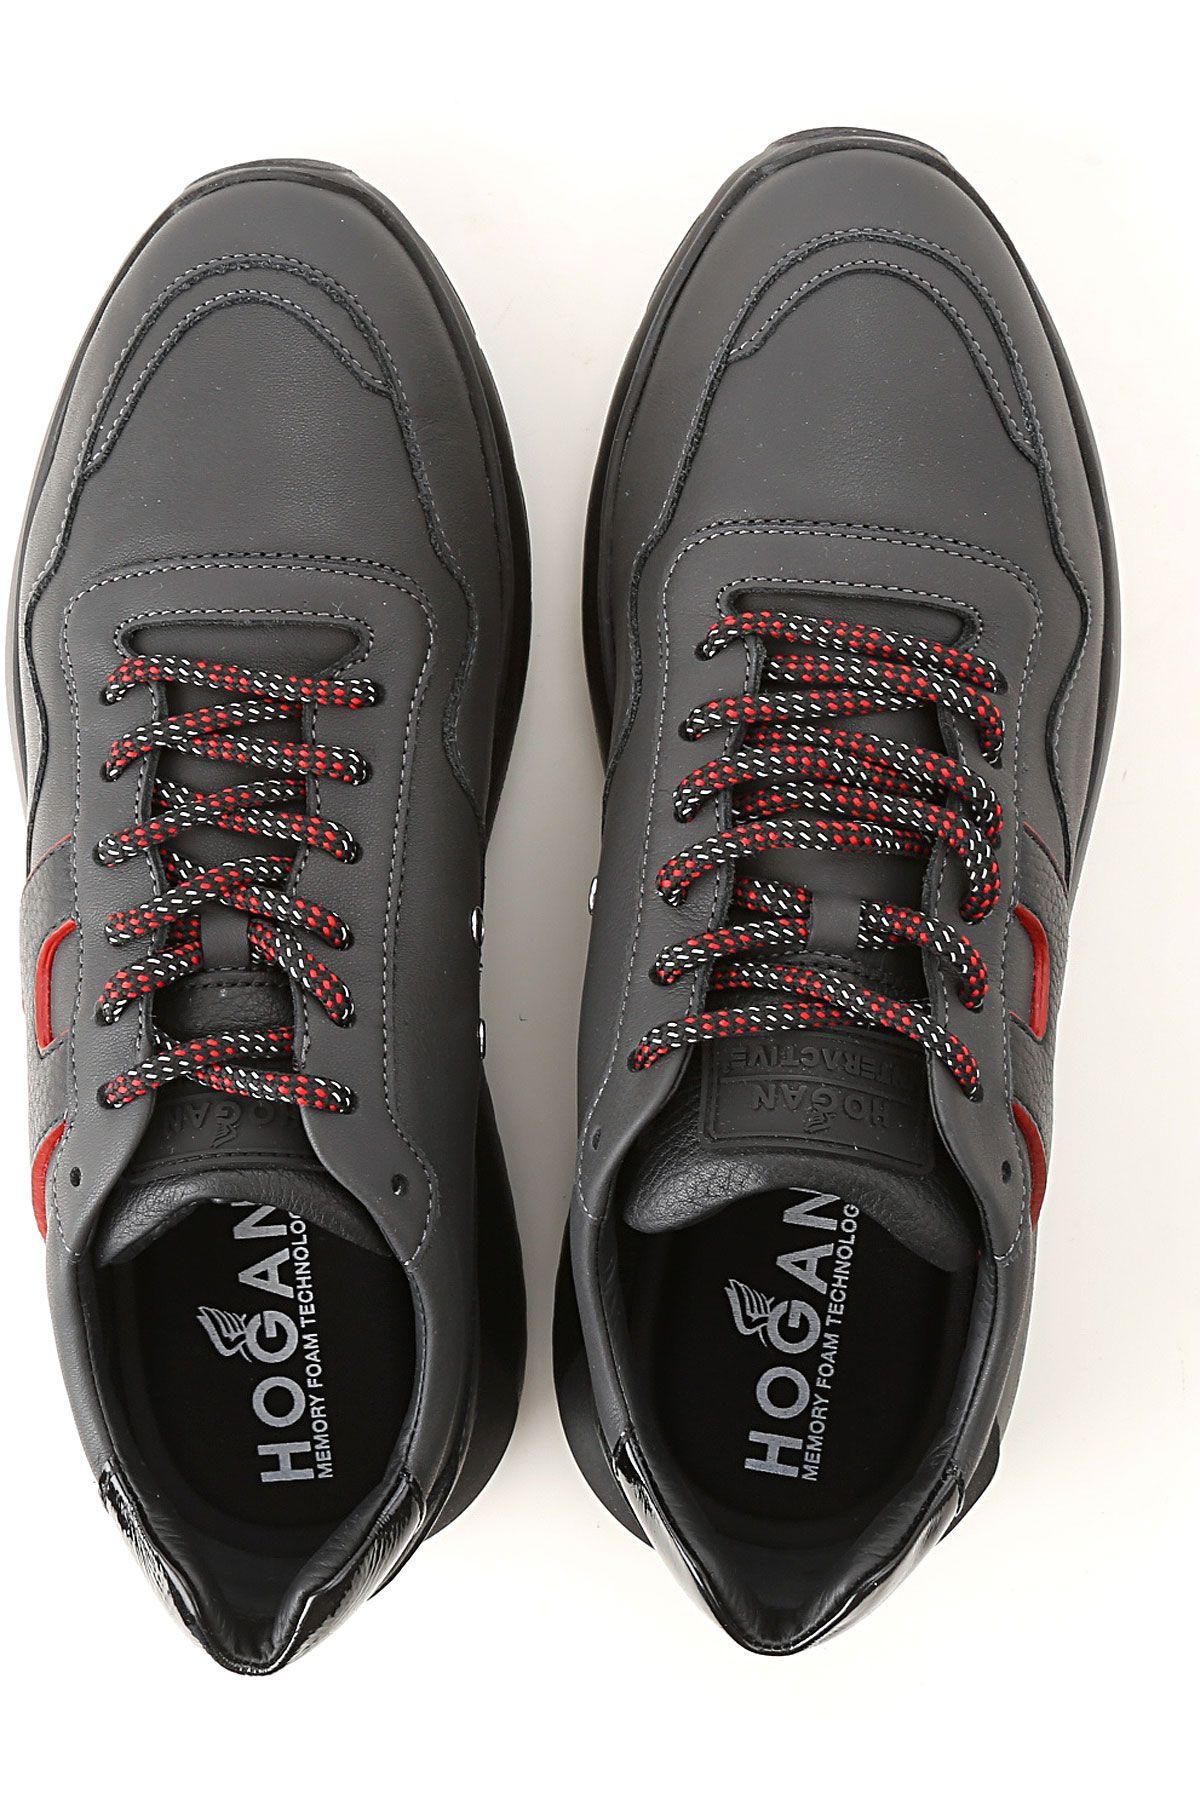 Black and Red H Logo - Hogan Shoes for Men Fall - Winter 2018/19 Black•Other colors:Red ...